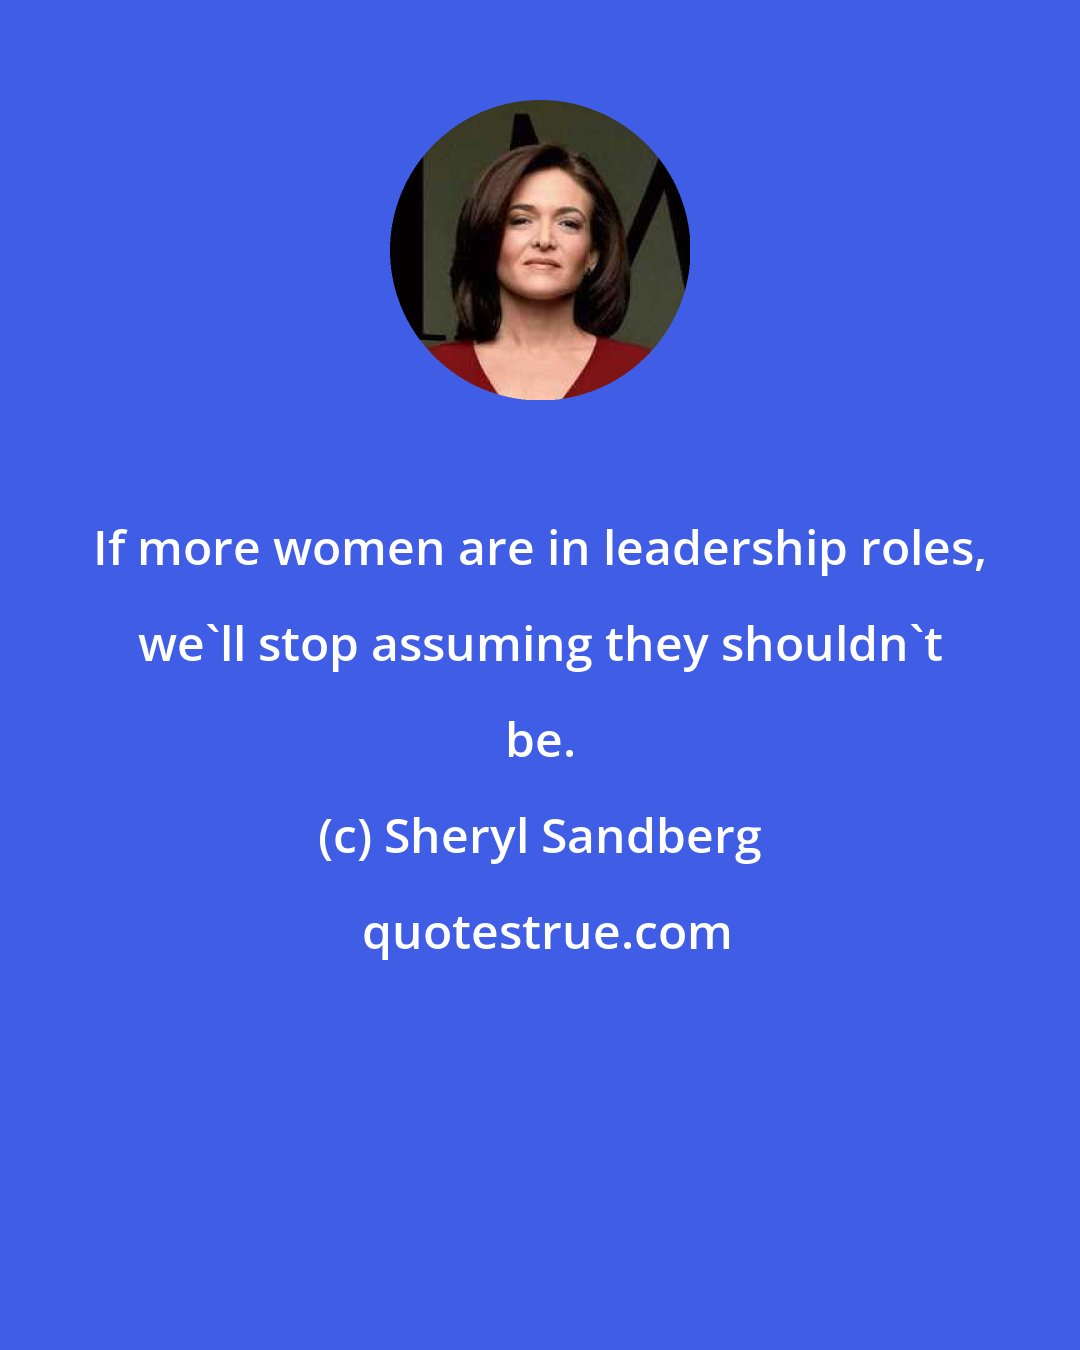 Sheryl Sandberg: If more women are in leadership roles, we'll stop assuming they shouldn't be.